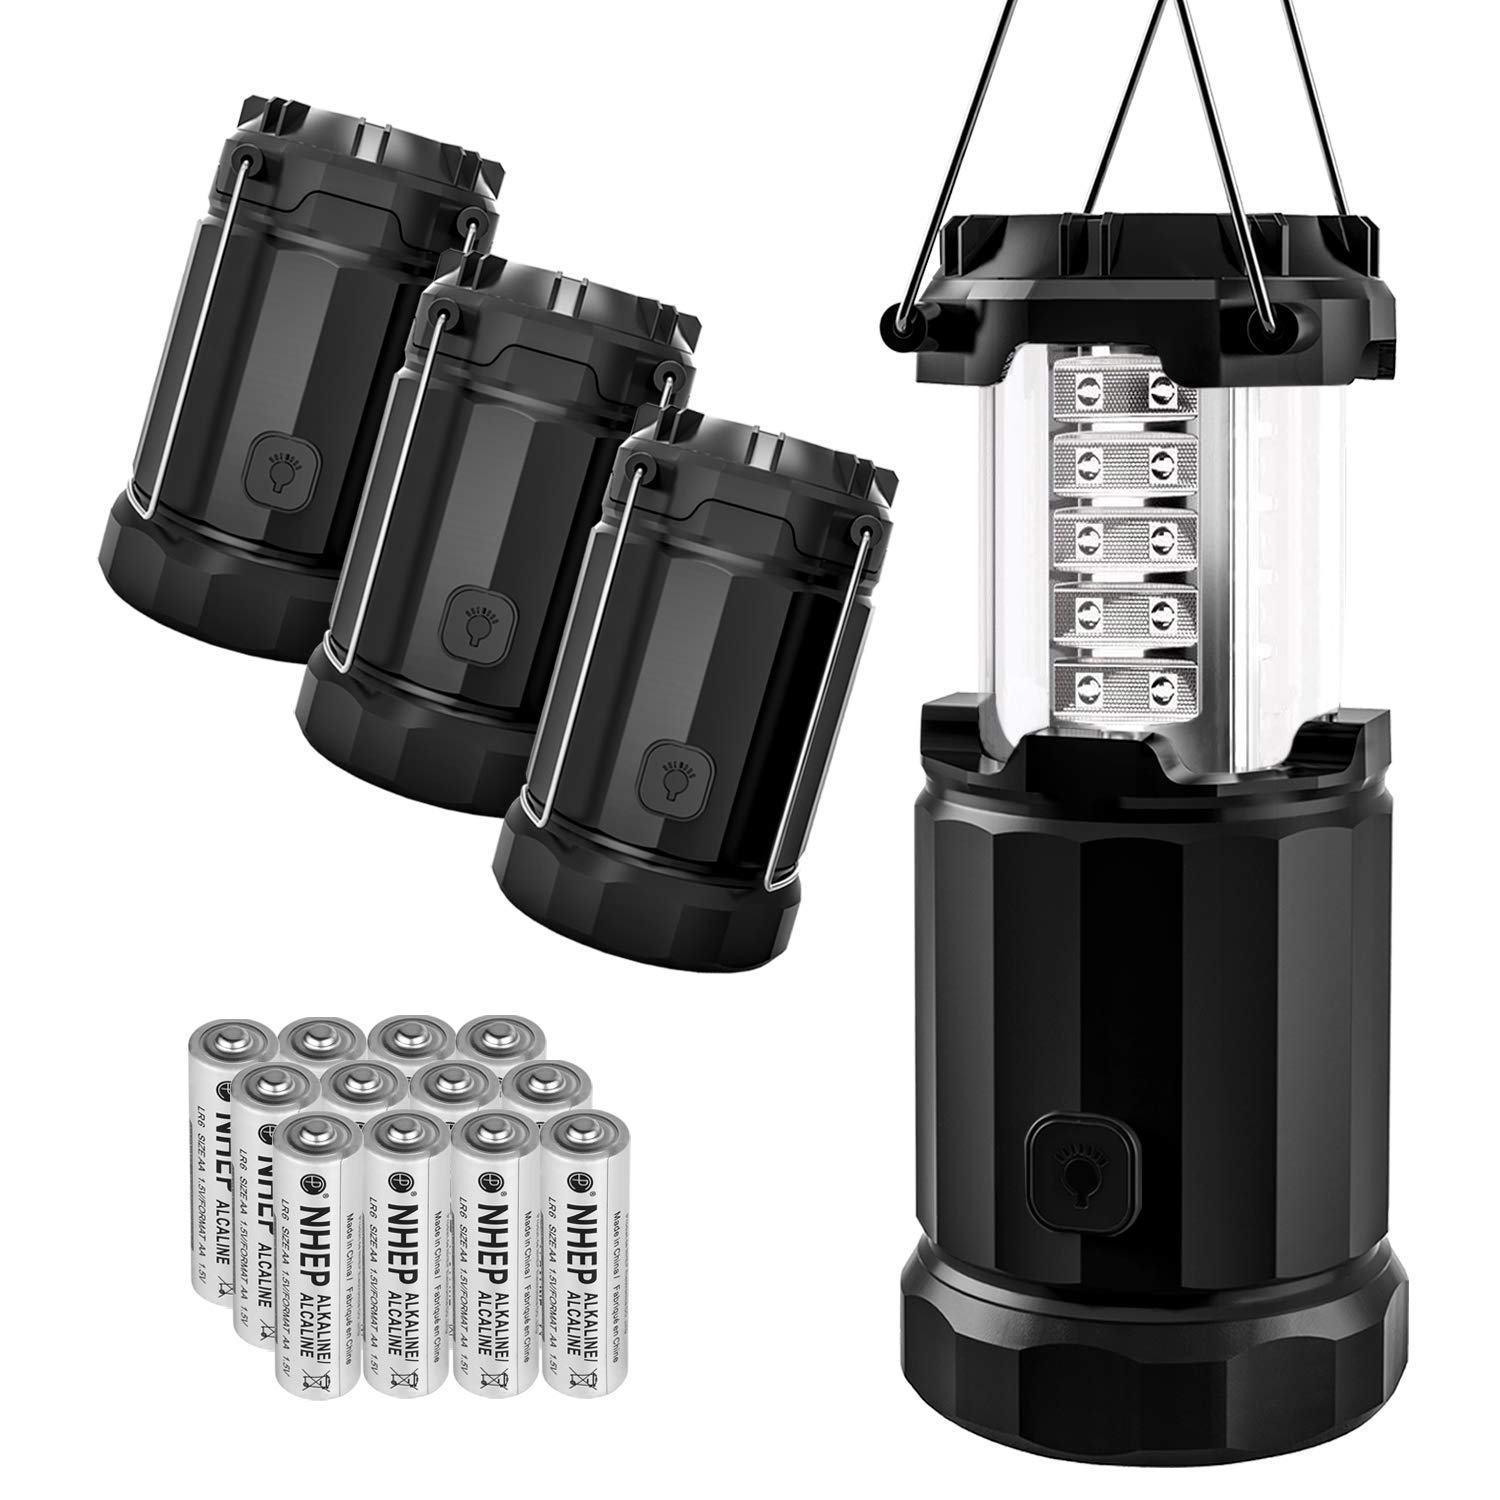 Book Cover Etekcity 4 Pack Portable LED Camping Lantern with 12 AA Batteries - Survival Kit for Emergency, Hurricane, Power Outage (Black, Collapsible) (CL30)